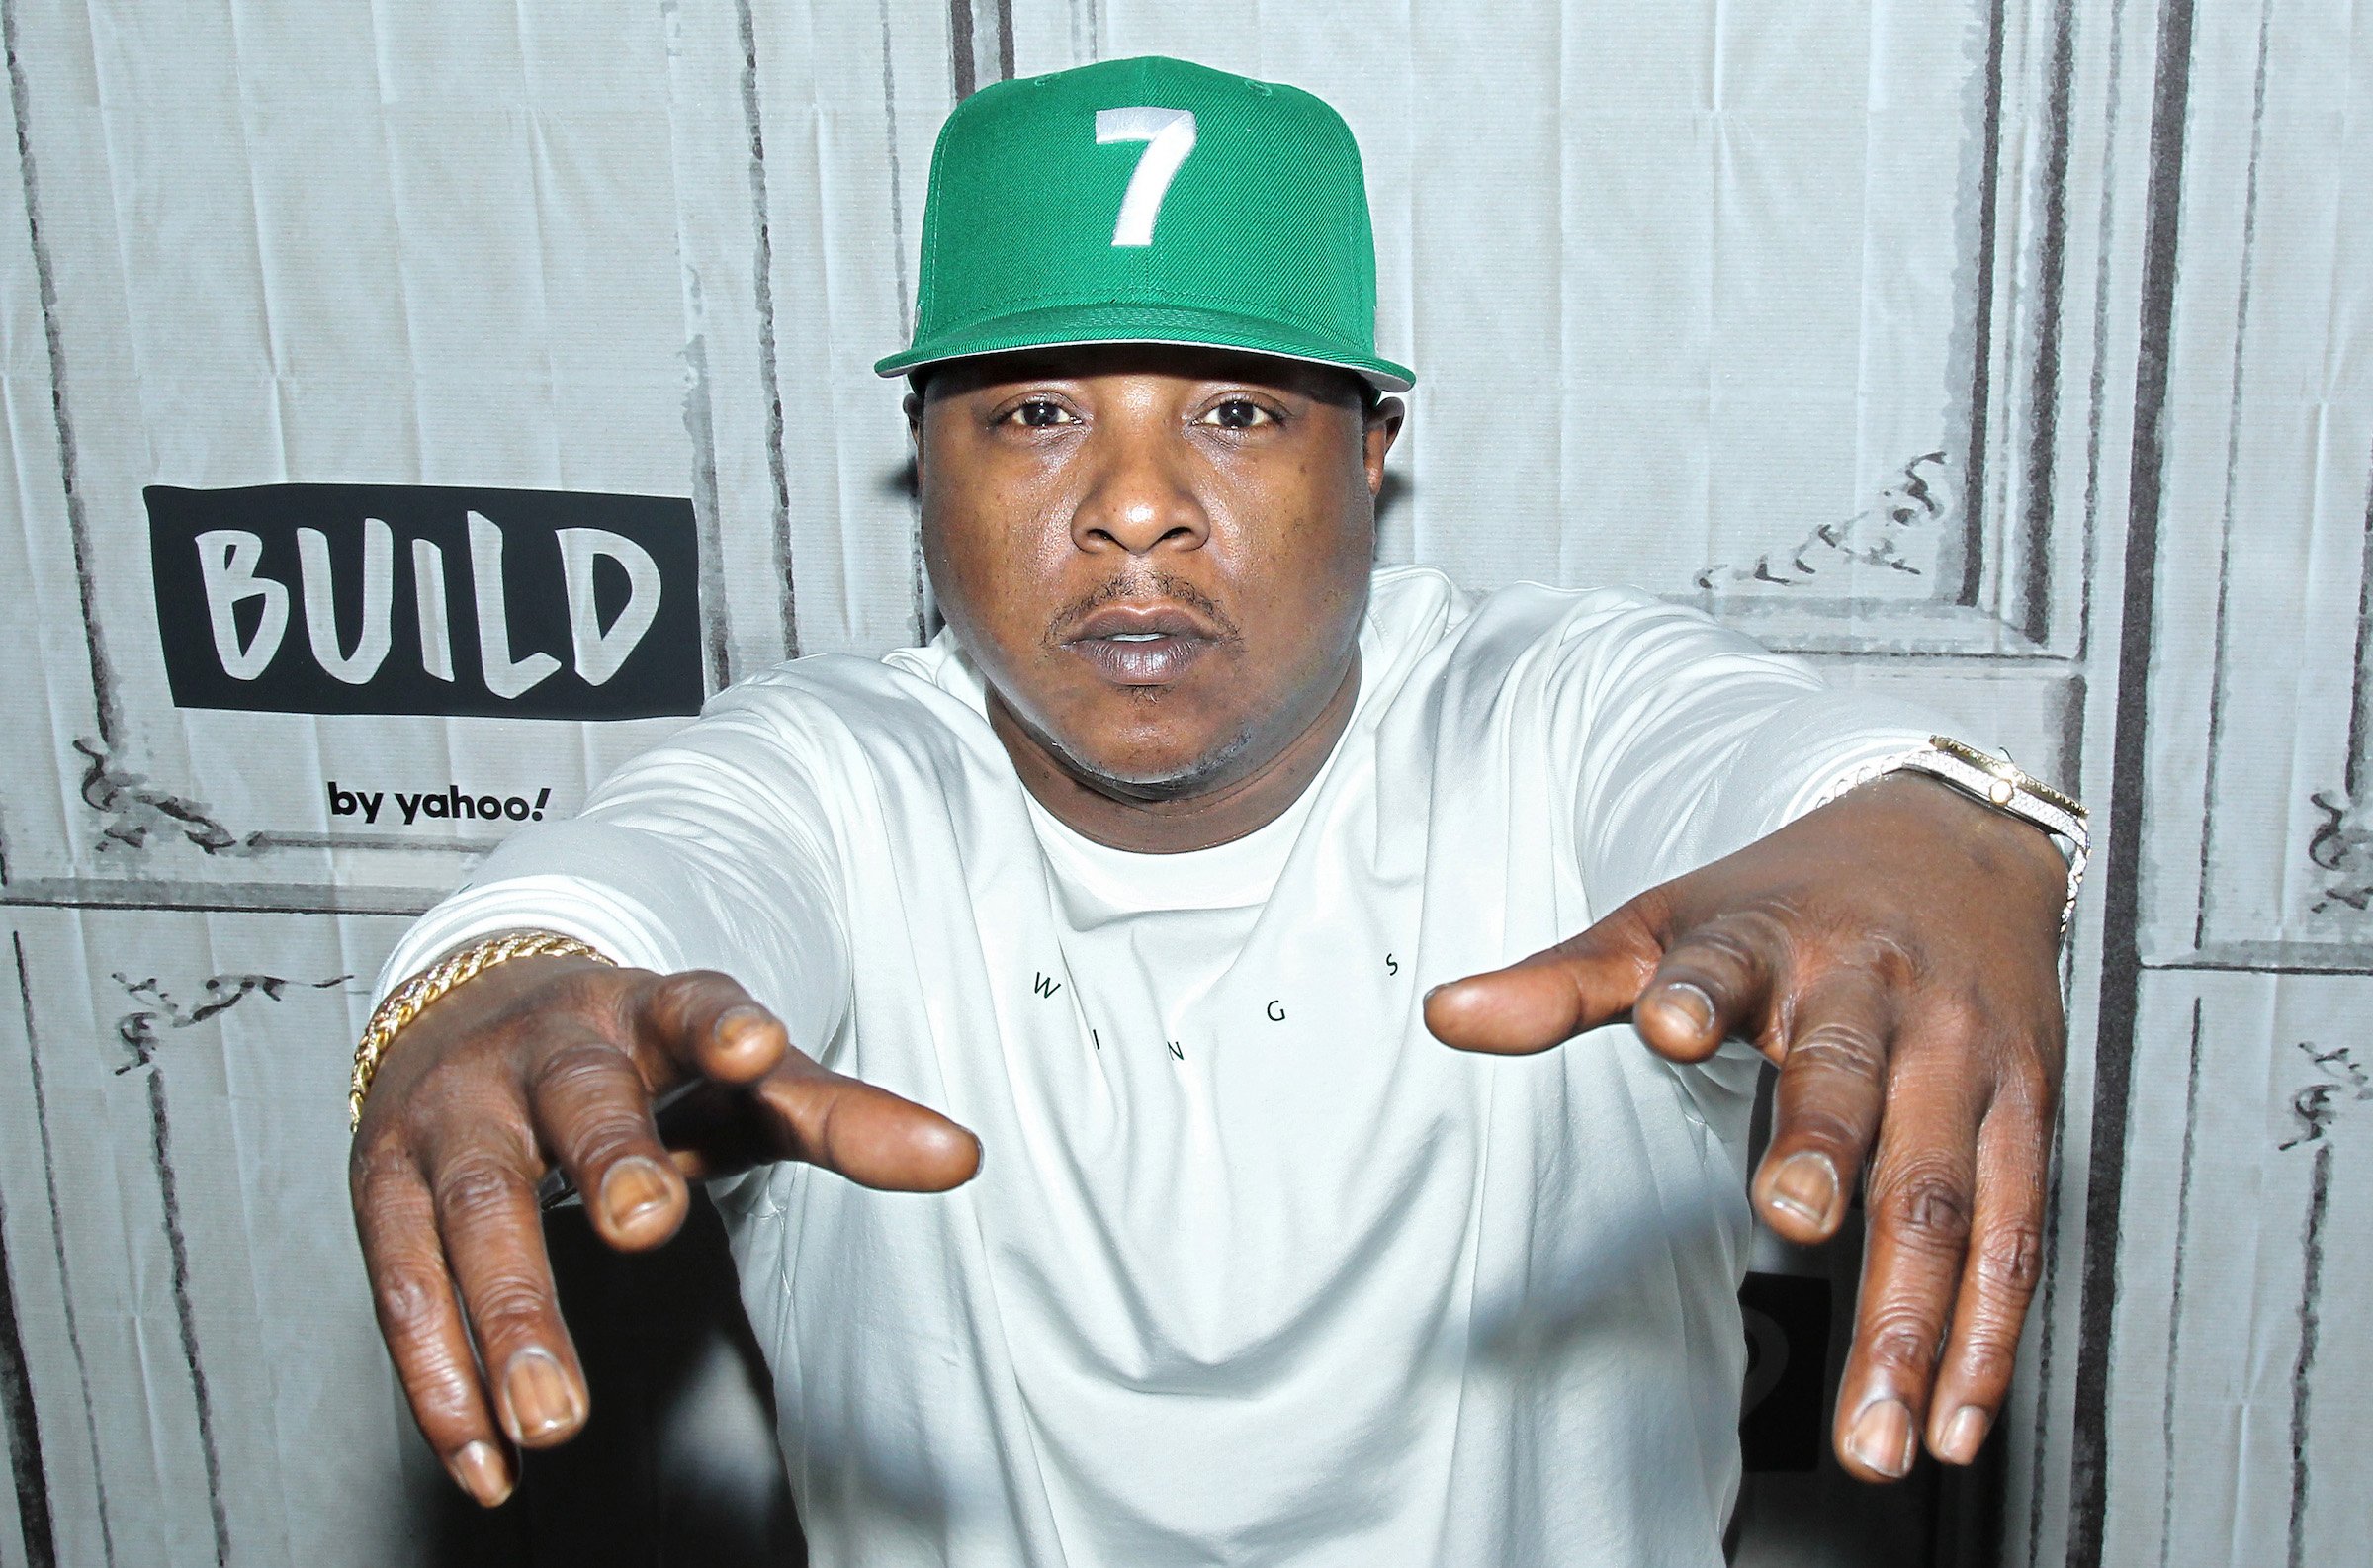 Sheek Louch Net Worth: How the Rapper Amassed His Wealth